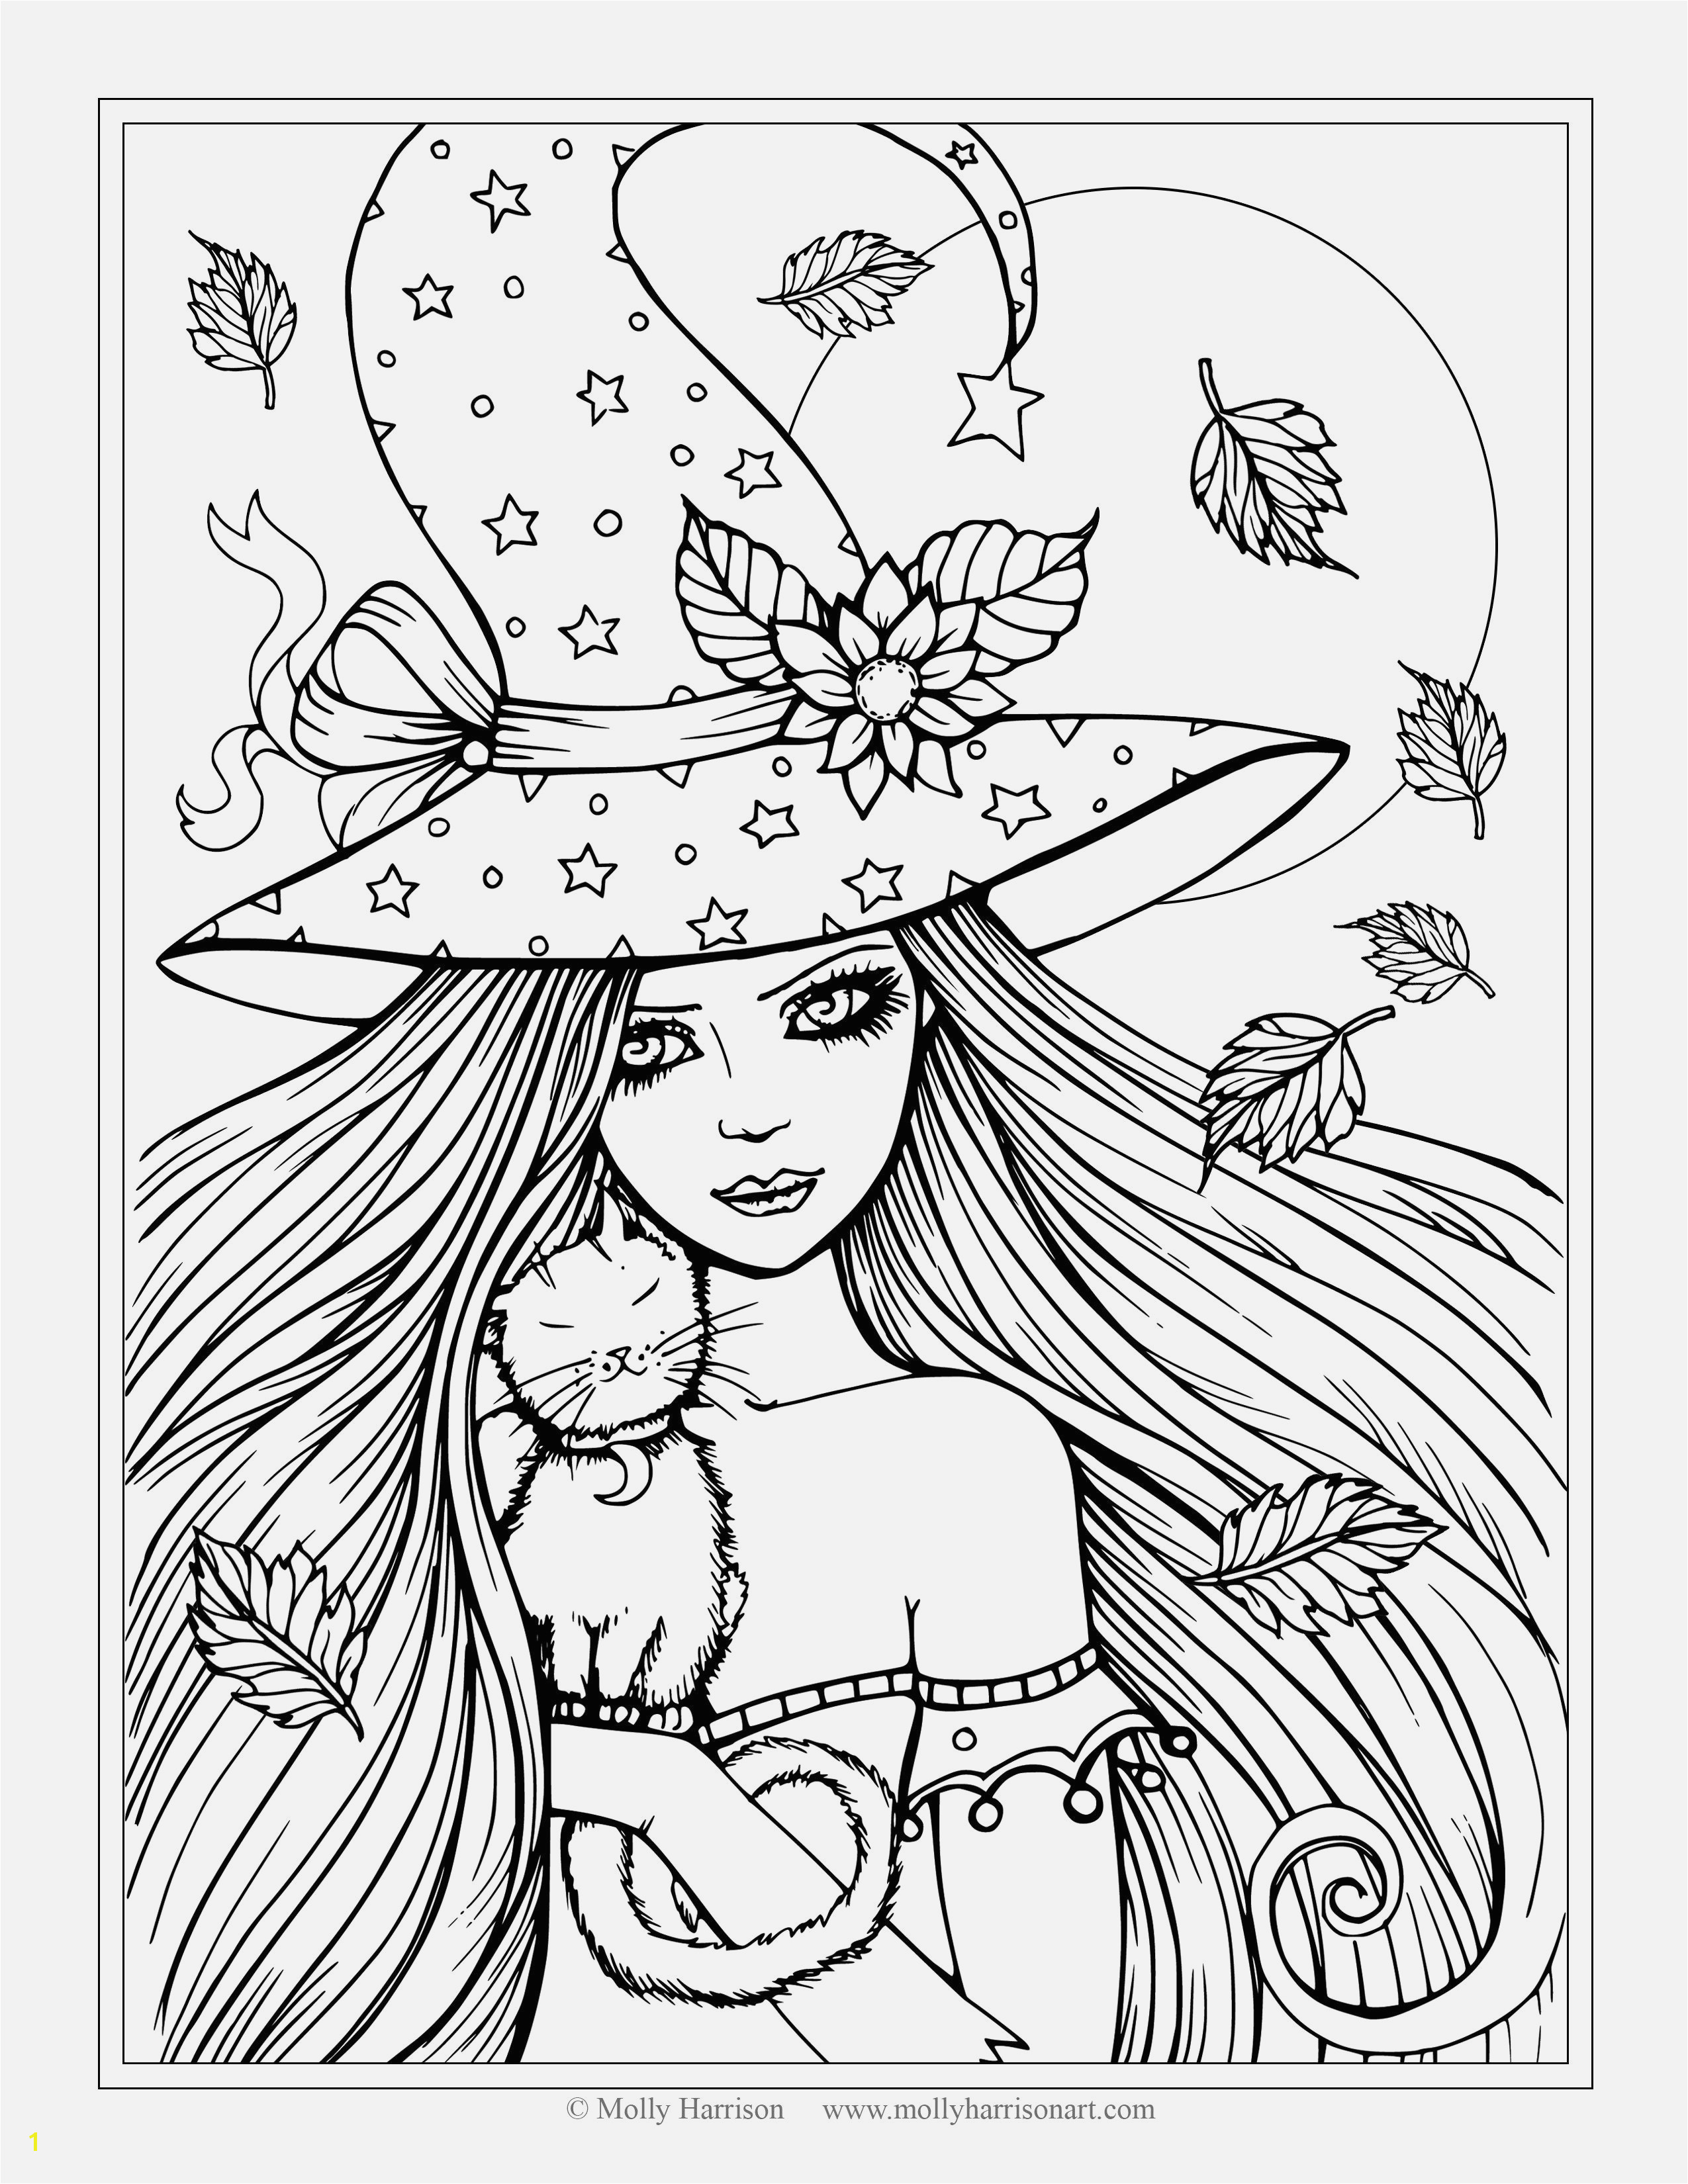 Red sox Coloring Pages Printable Coloring Pages for Girls 12 and Up New Girl Coloring Pages Hard Lady